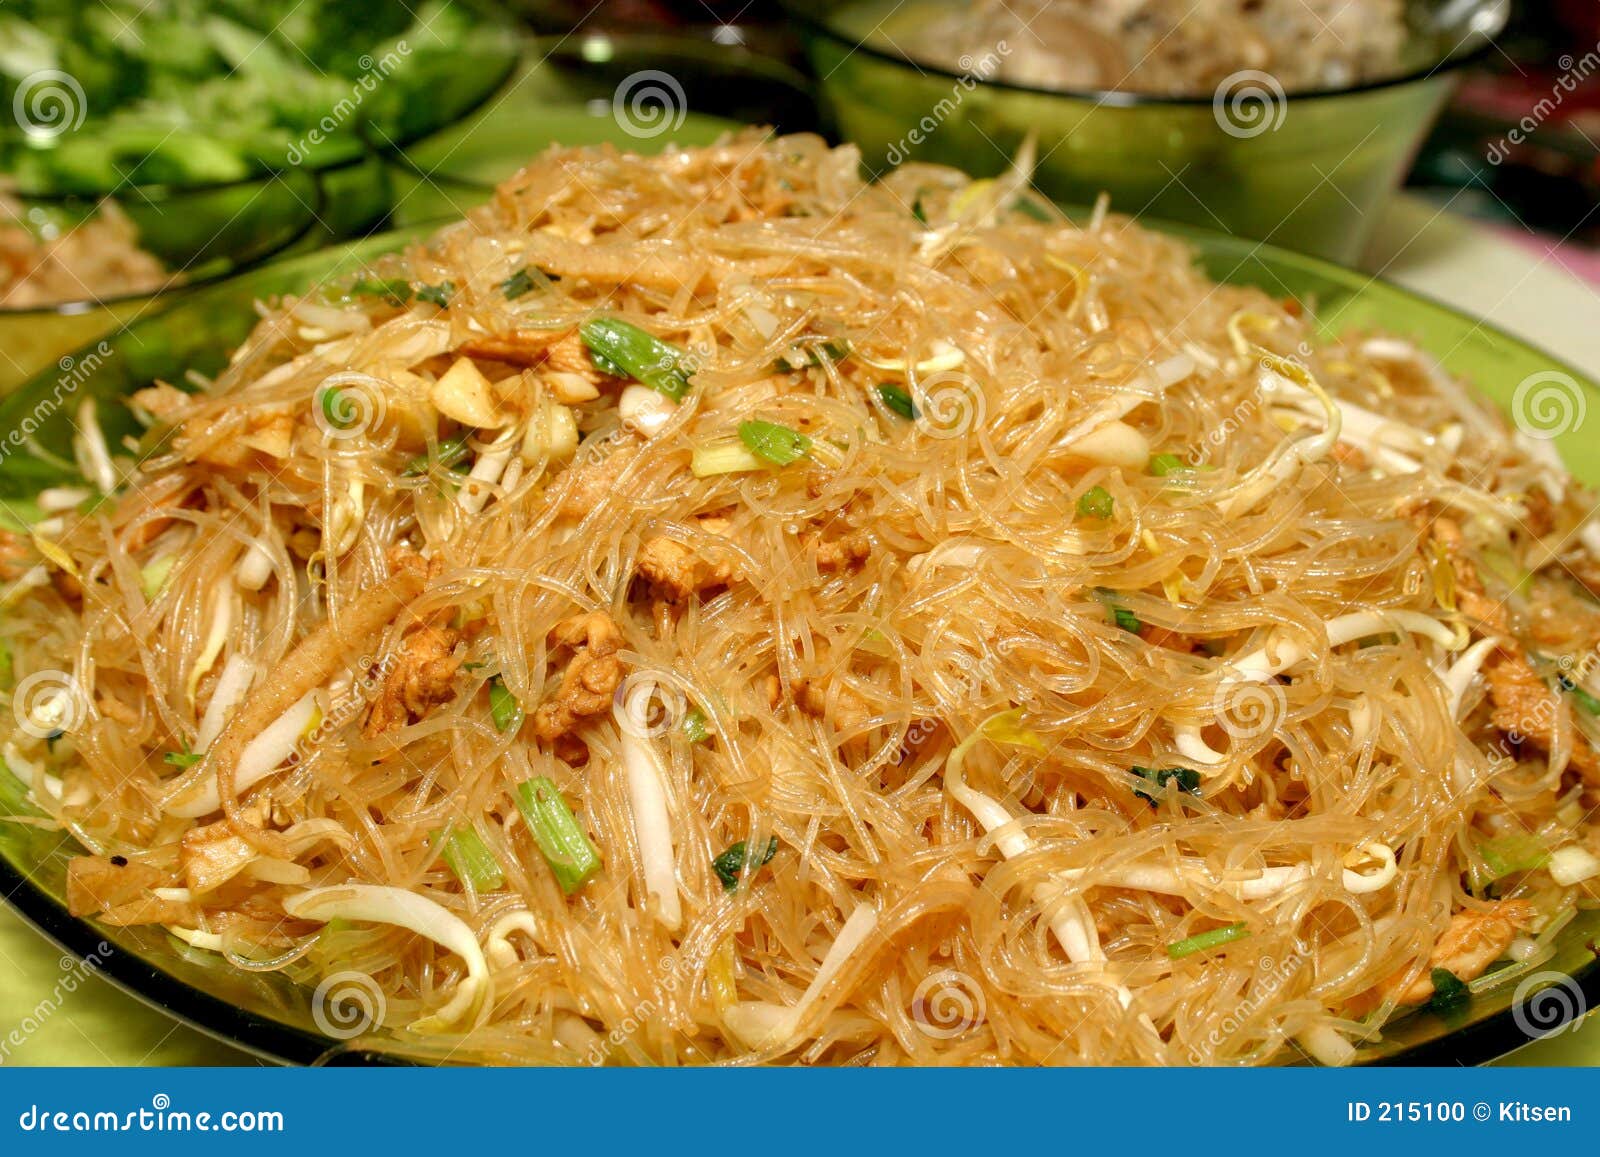 Chinese glass noodles